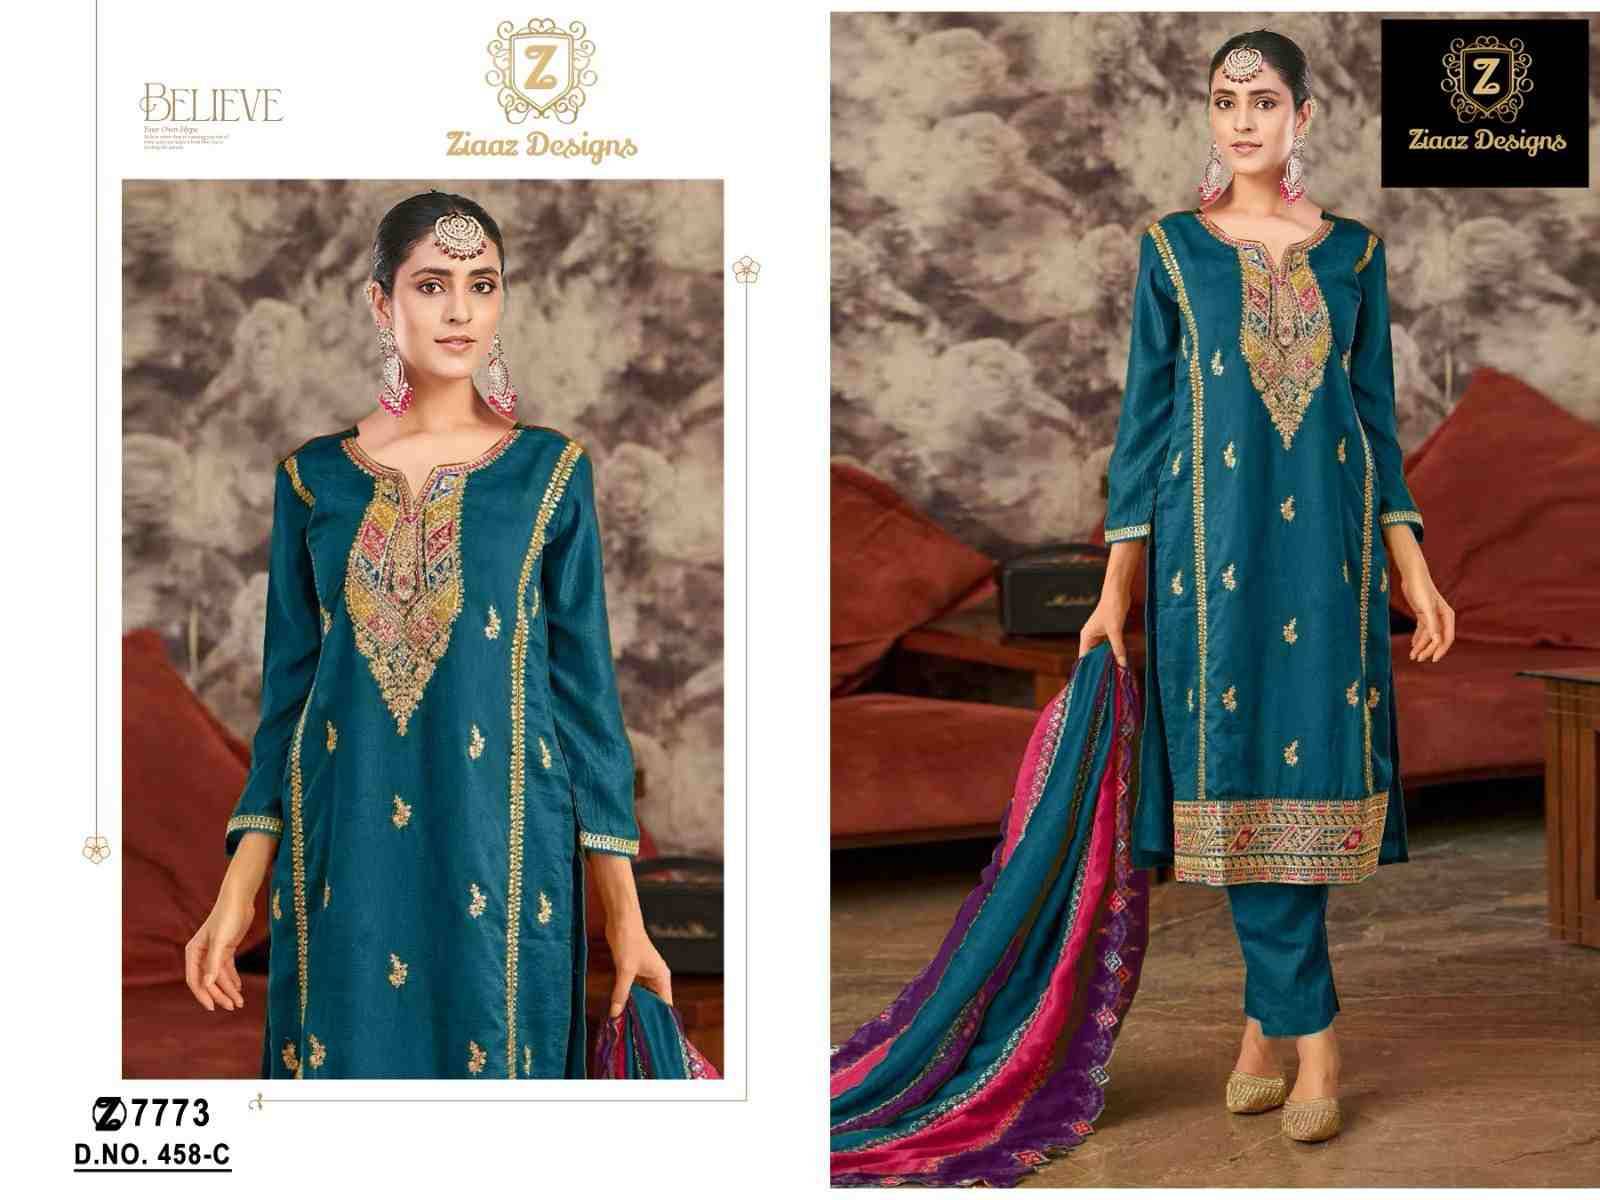 Ziaaz Designs Hit Design 458 Colours By Ziaaz Designs 458-A To 458-D Series Designer Pakistani Suits Collection Beautiful Stylish Fancy Colorful Party Wear & Occasional Wear Chinnon Embroidered Dresses At Wholesale Price